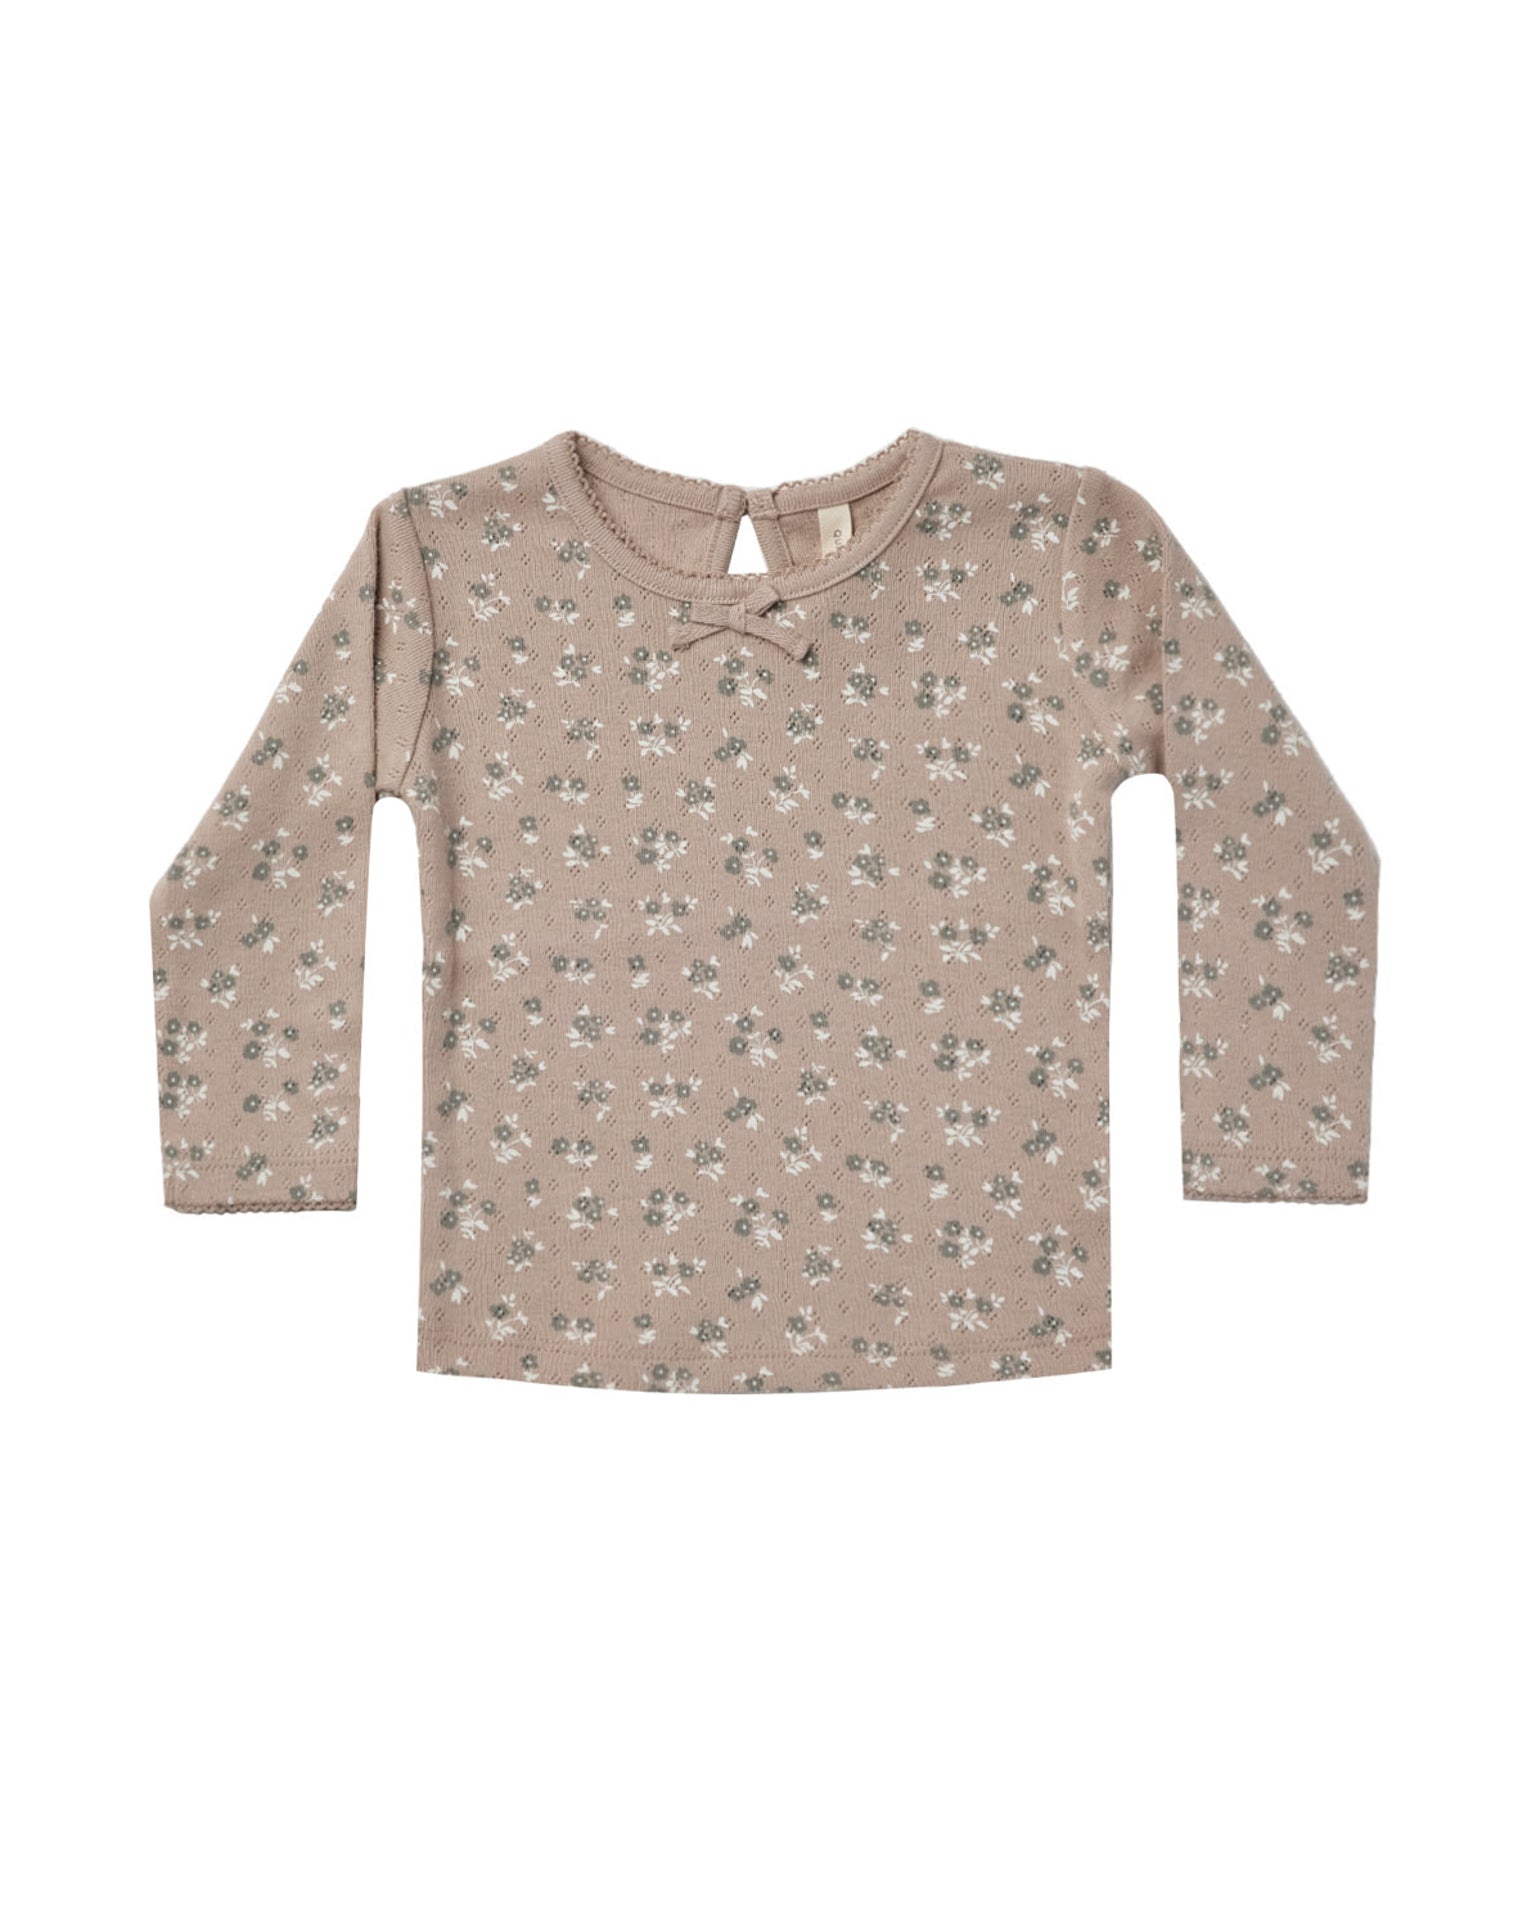 Little quincy mae baby pointelle long sleeve tee in truffle floral